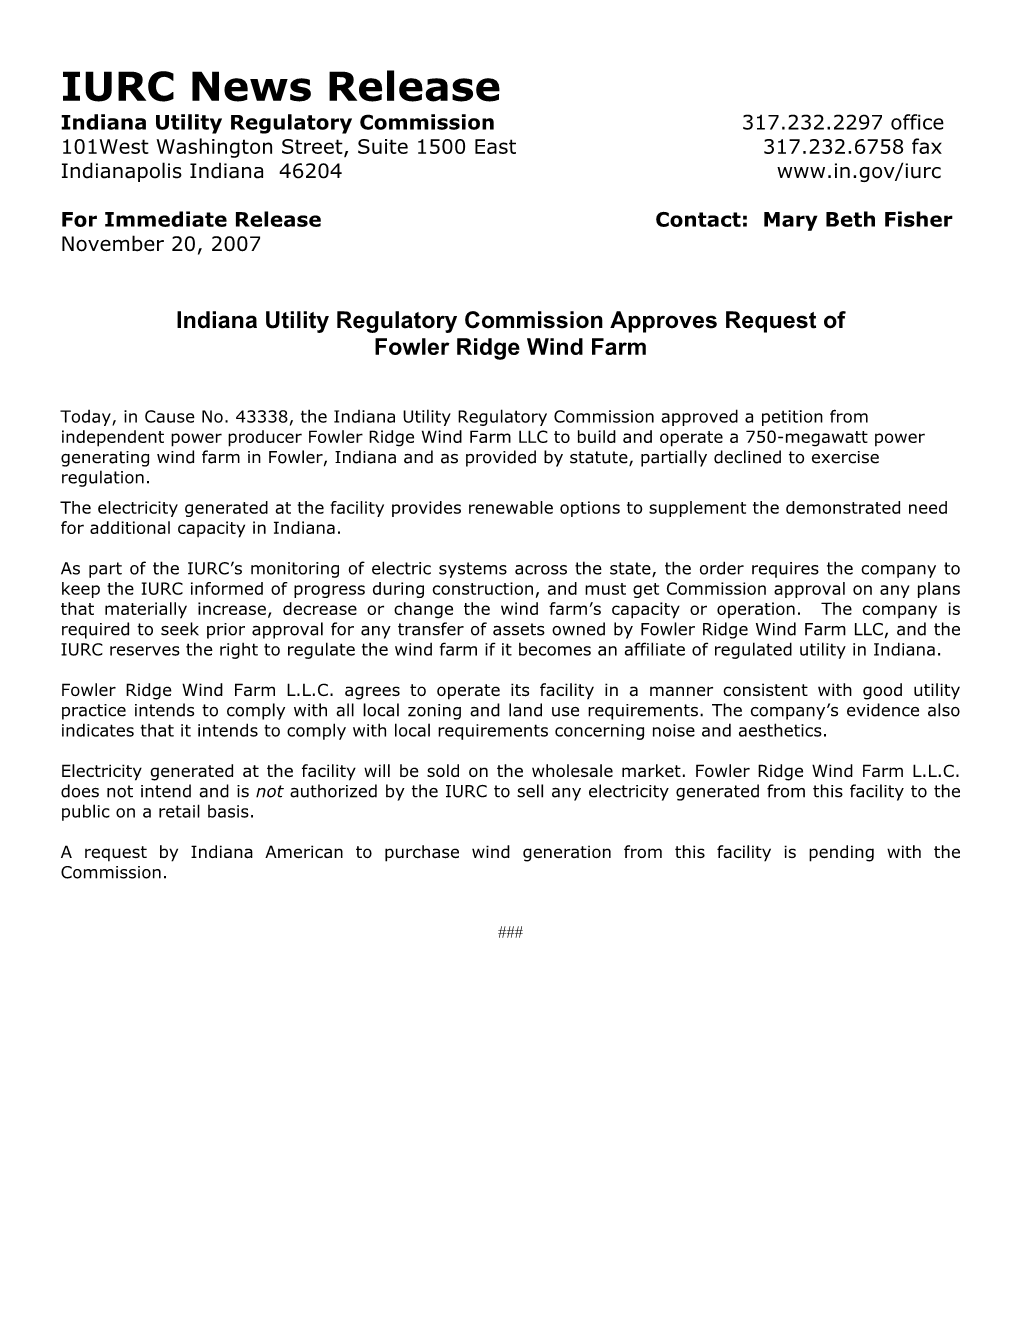 Indiana Utility Regulatory Commission Approves Request of Fowler Ridge Wind Farm